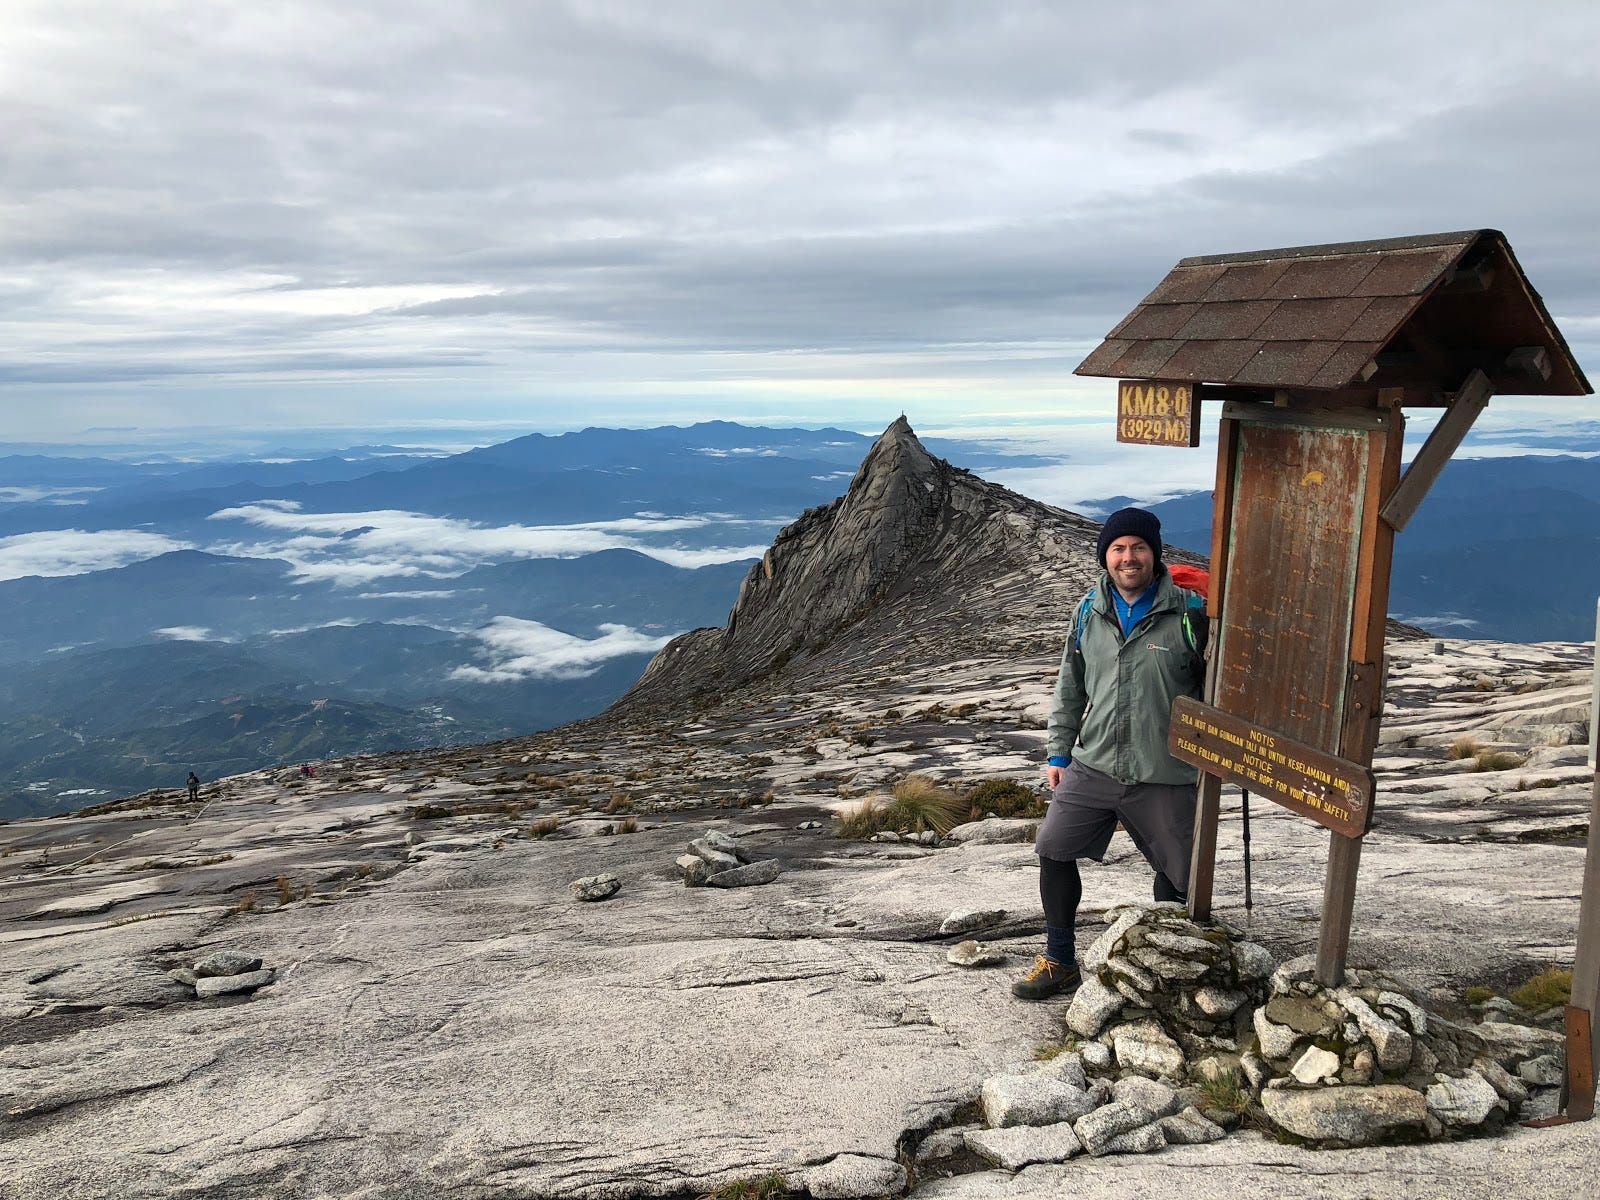 Climbing Mount Kinabalu Reminded Me of Some Important Lessons